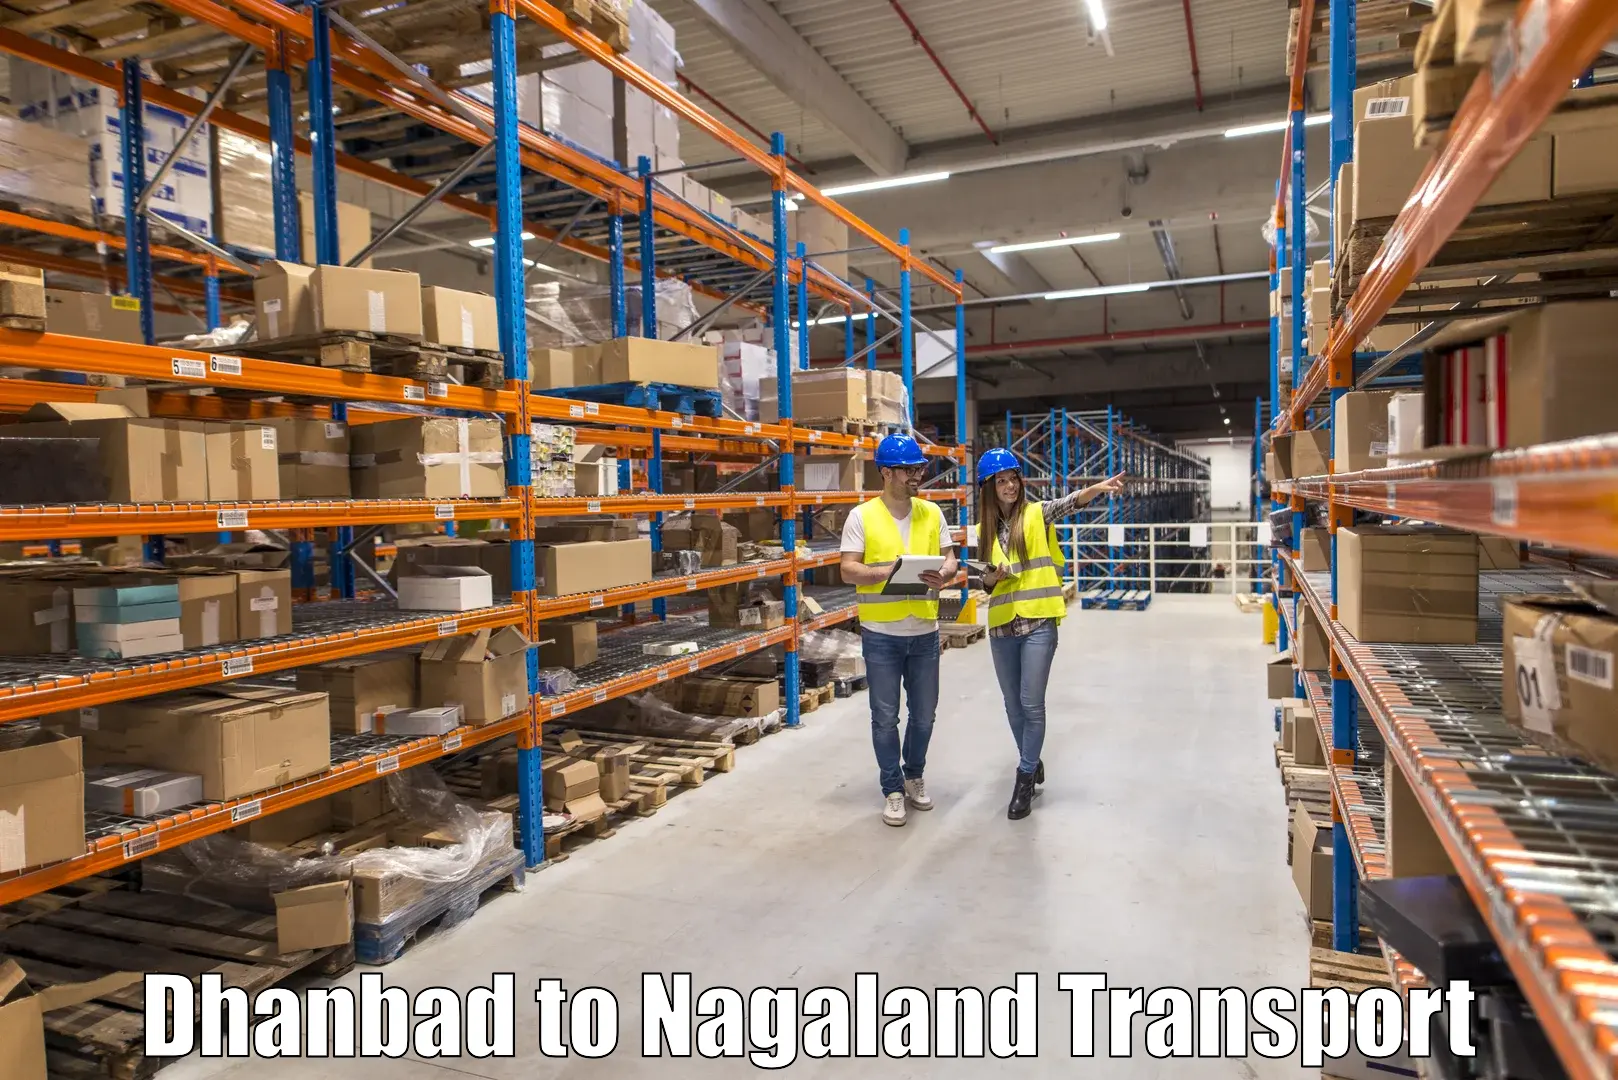 Cargo train transport services Dhanbad to Nagaland